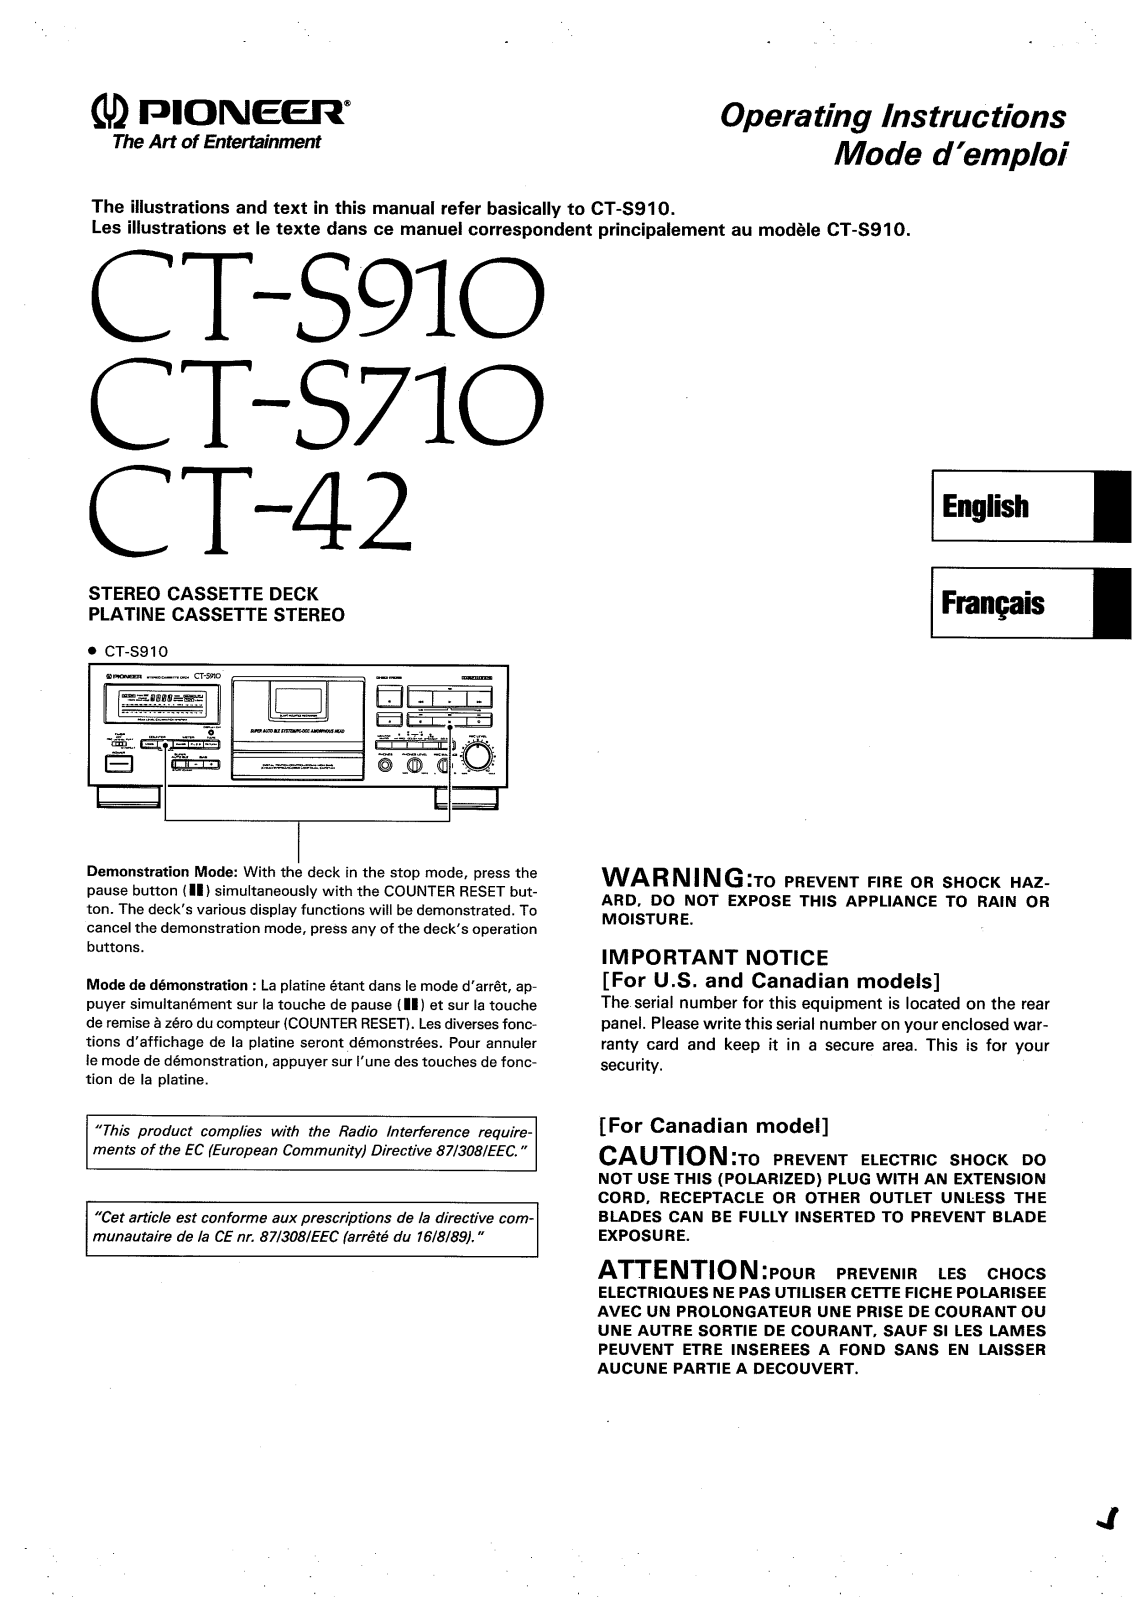 Pioneer CT-42, CTS-710, CTS-910 Owners manual